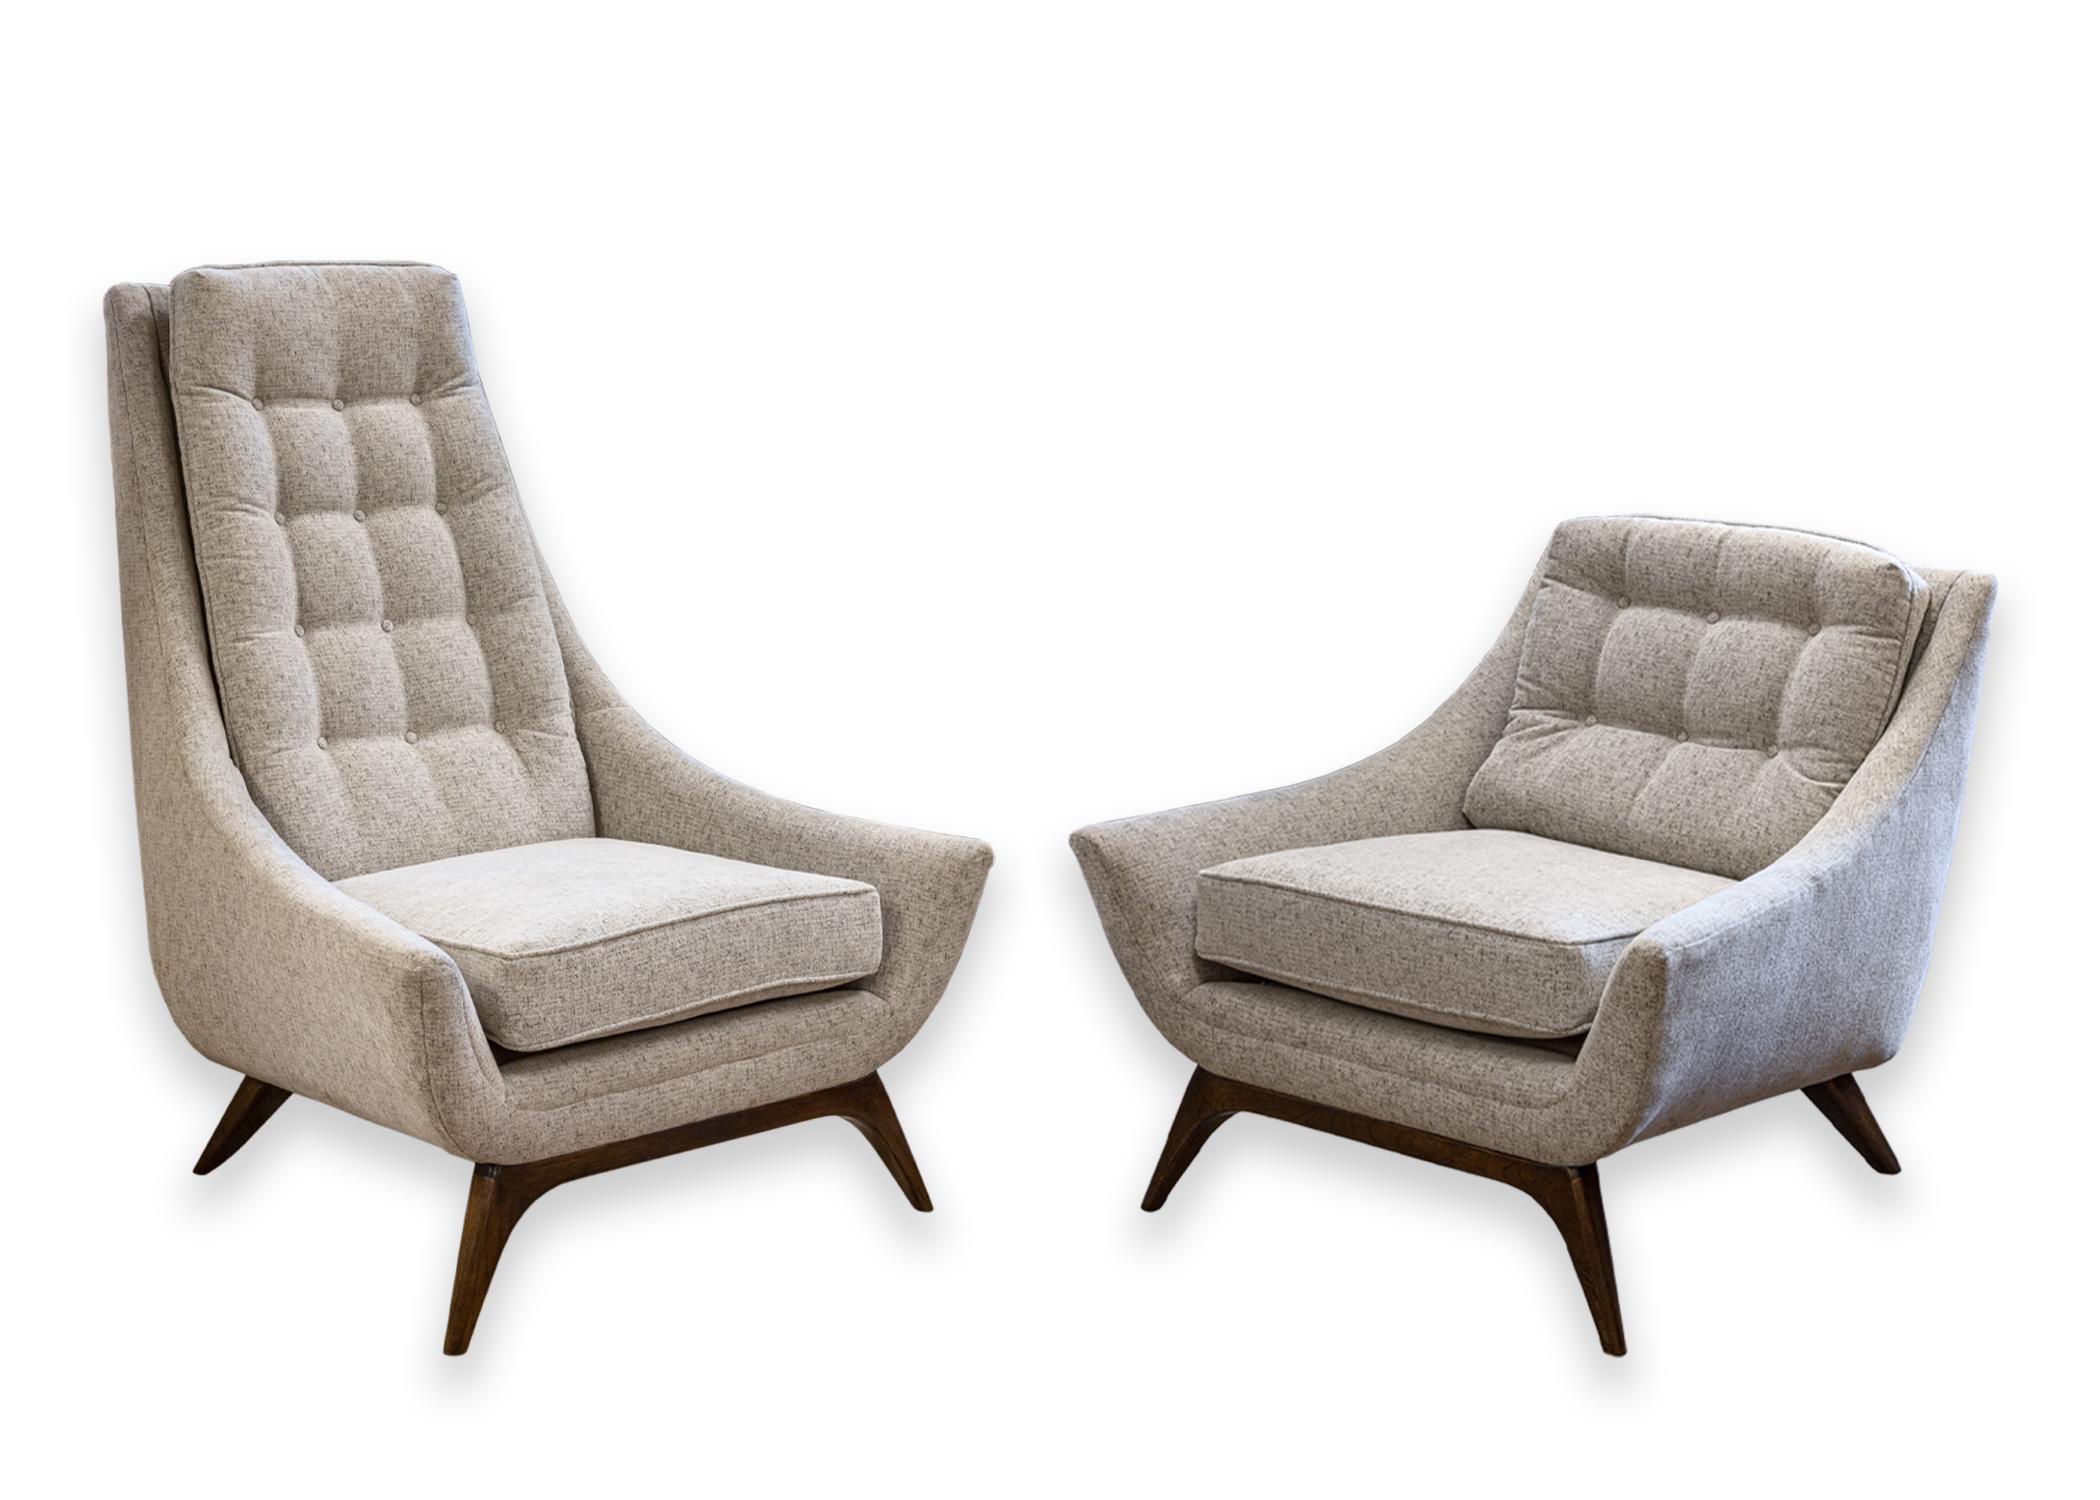 A his and hers Adrian Pearsall style set of accent chairs. A gorgeous set of reupholstered chairs featuring a lovely grey tufted fabric, and walnut legs. Each chair is a different size and proportion, his and hers. The tall chair features a long